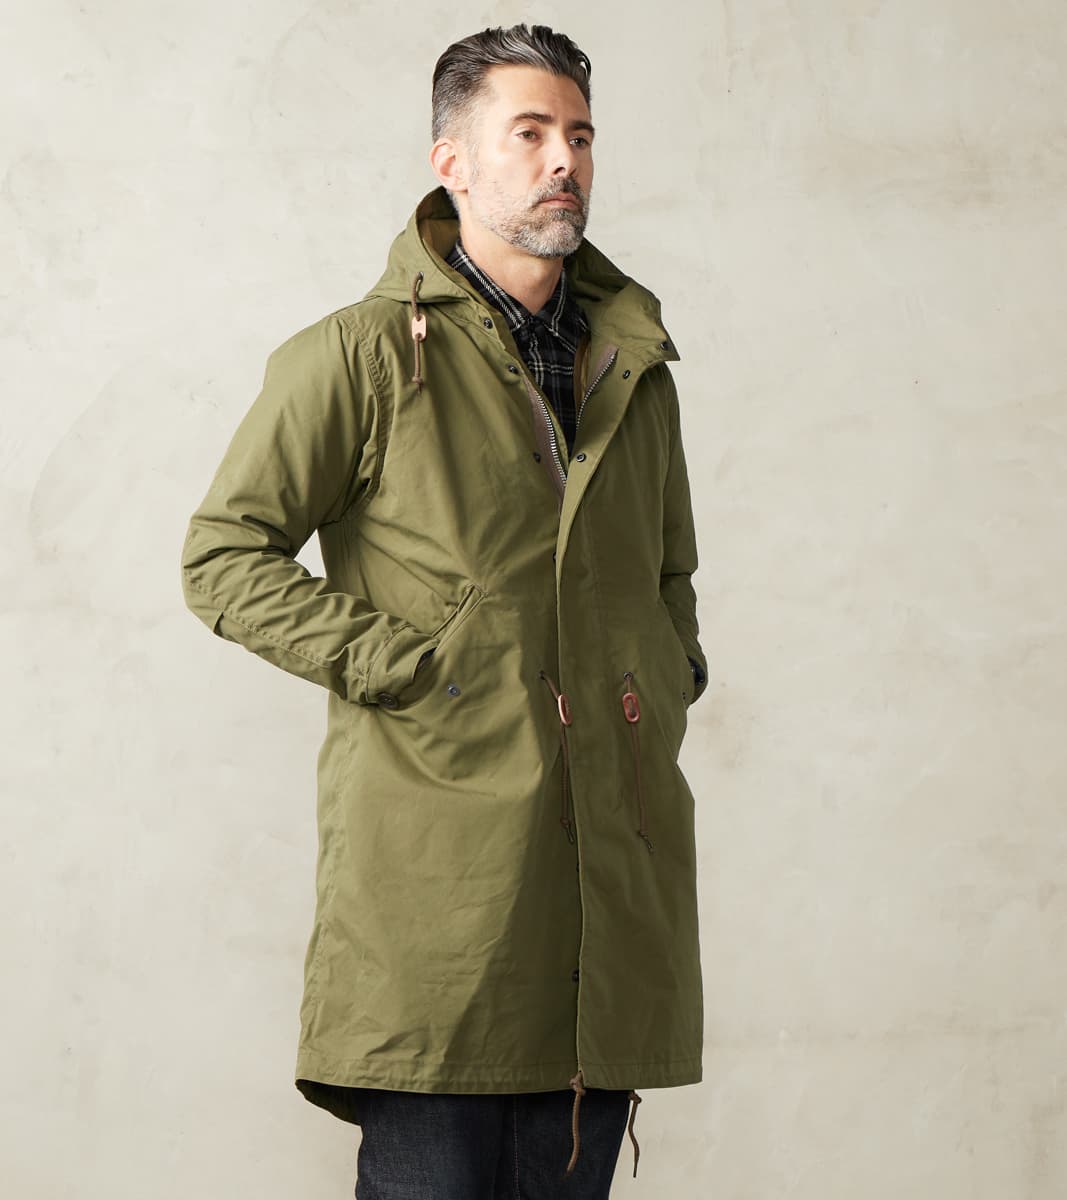 Iron Heart 38-OLV - M-51 Field Coat - 5oz. Shell & Quilted Liner